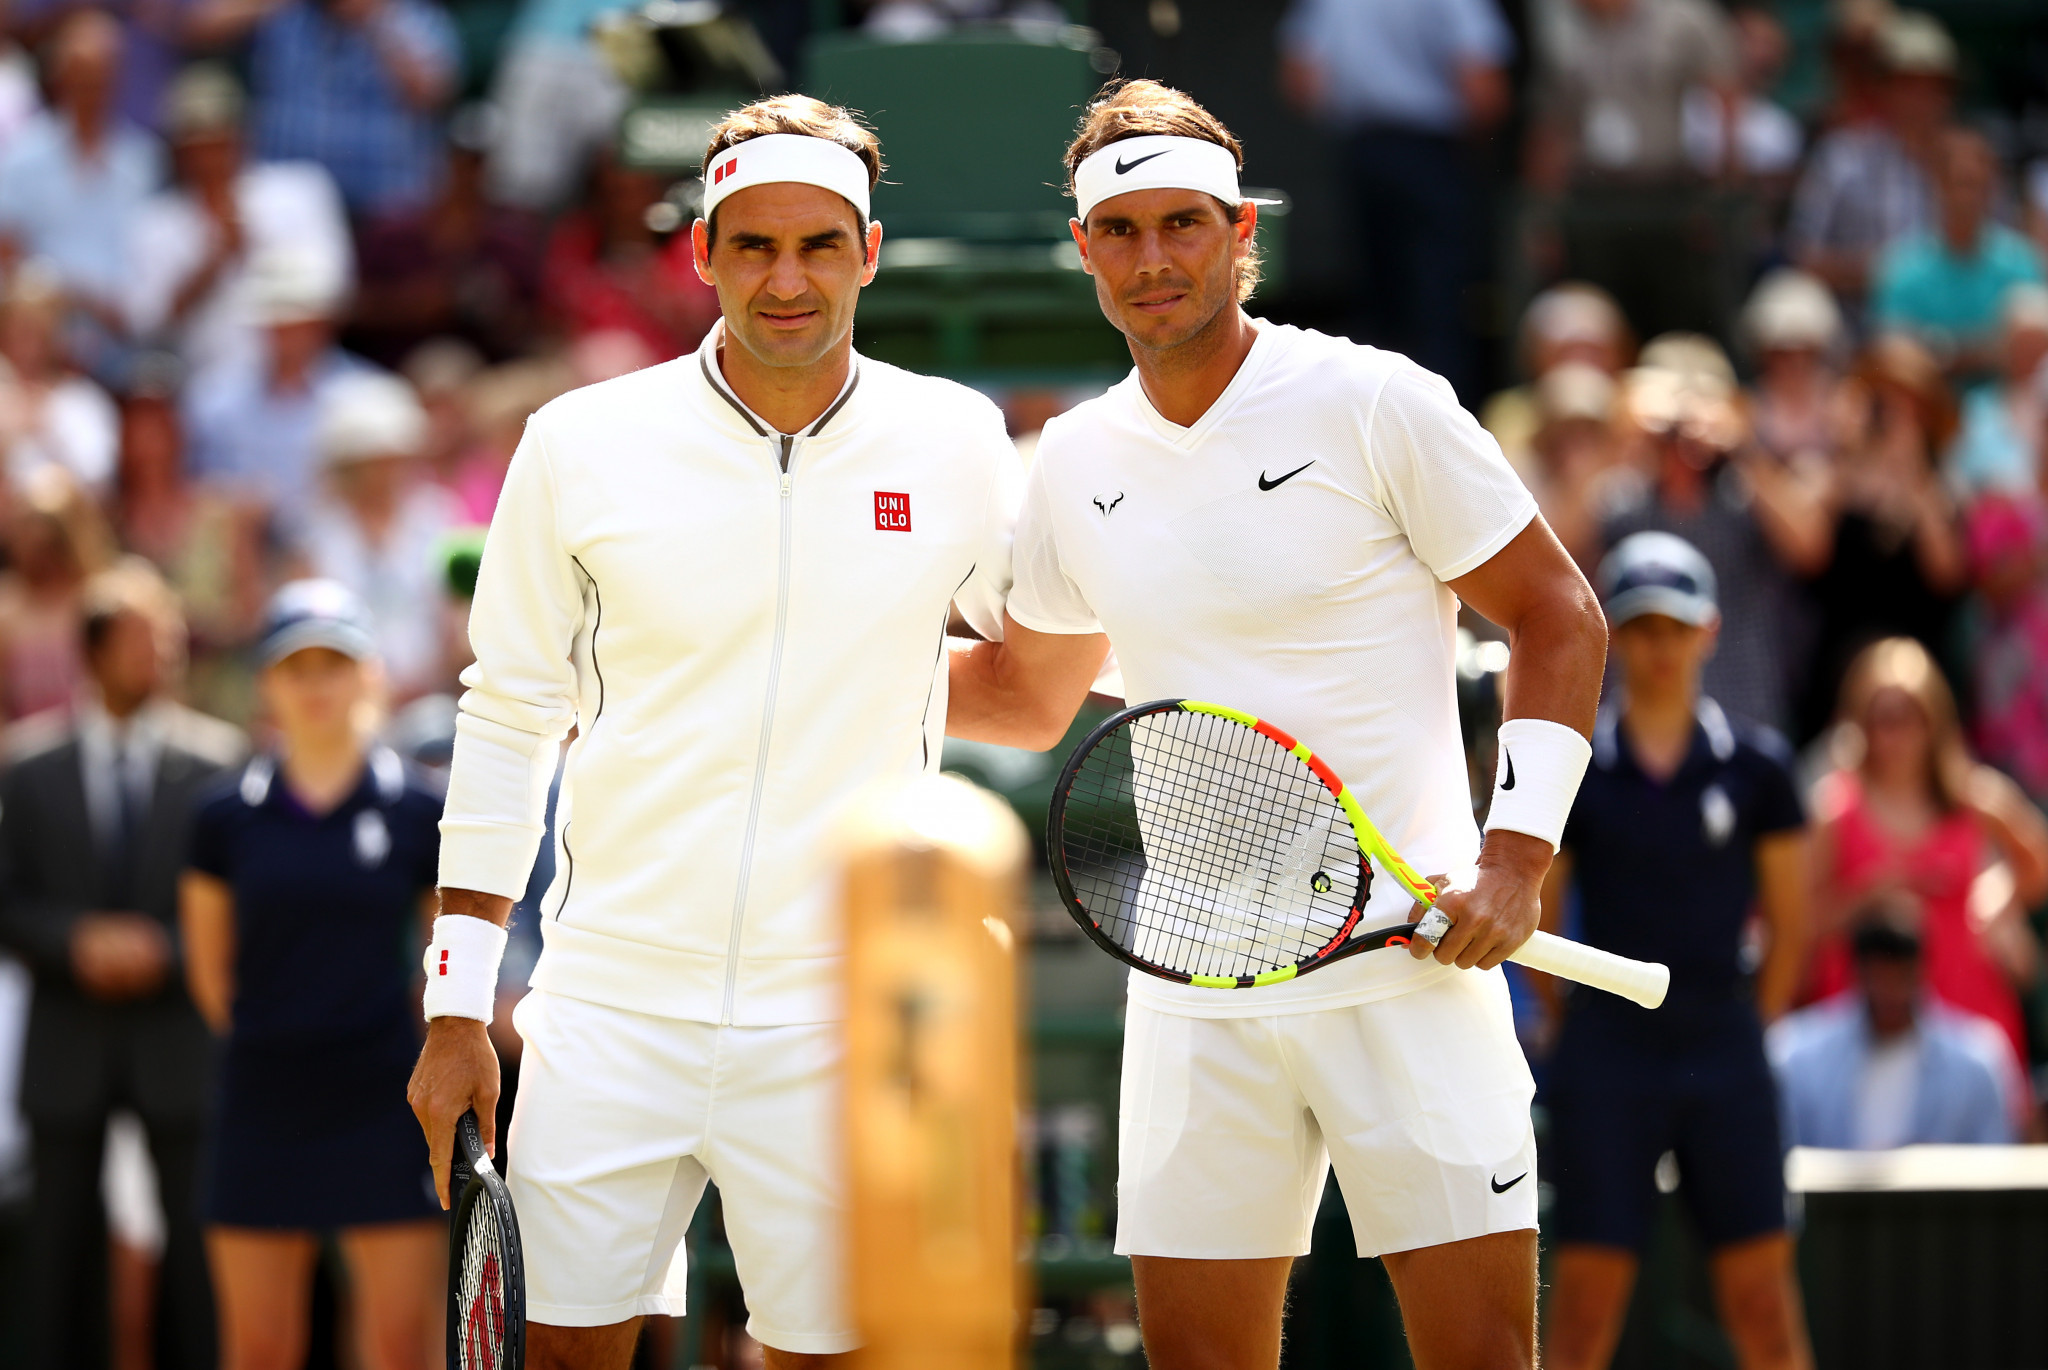 Federer and Nadal met at Wimbledon for the first time since the epic 2008 final ©Getty Images